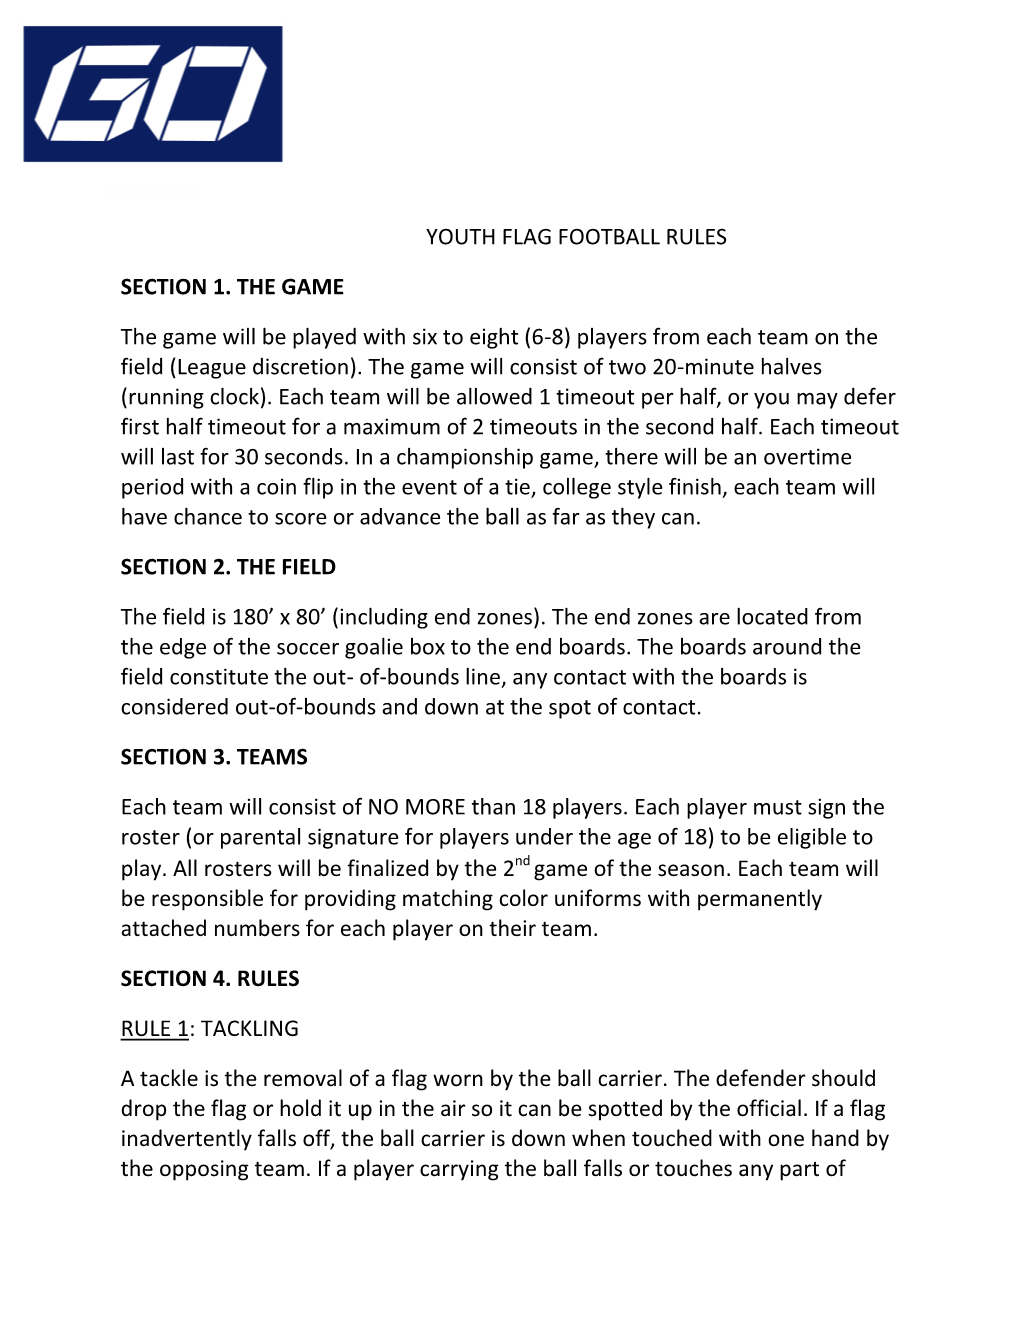 Youth Flag Football Rules Section 1